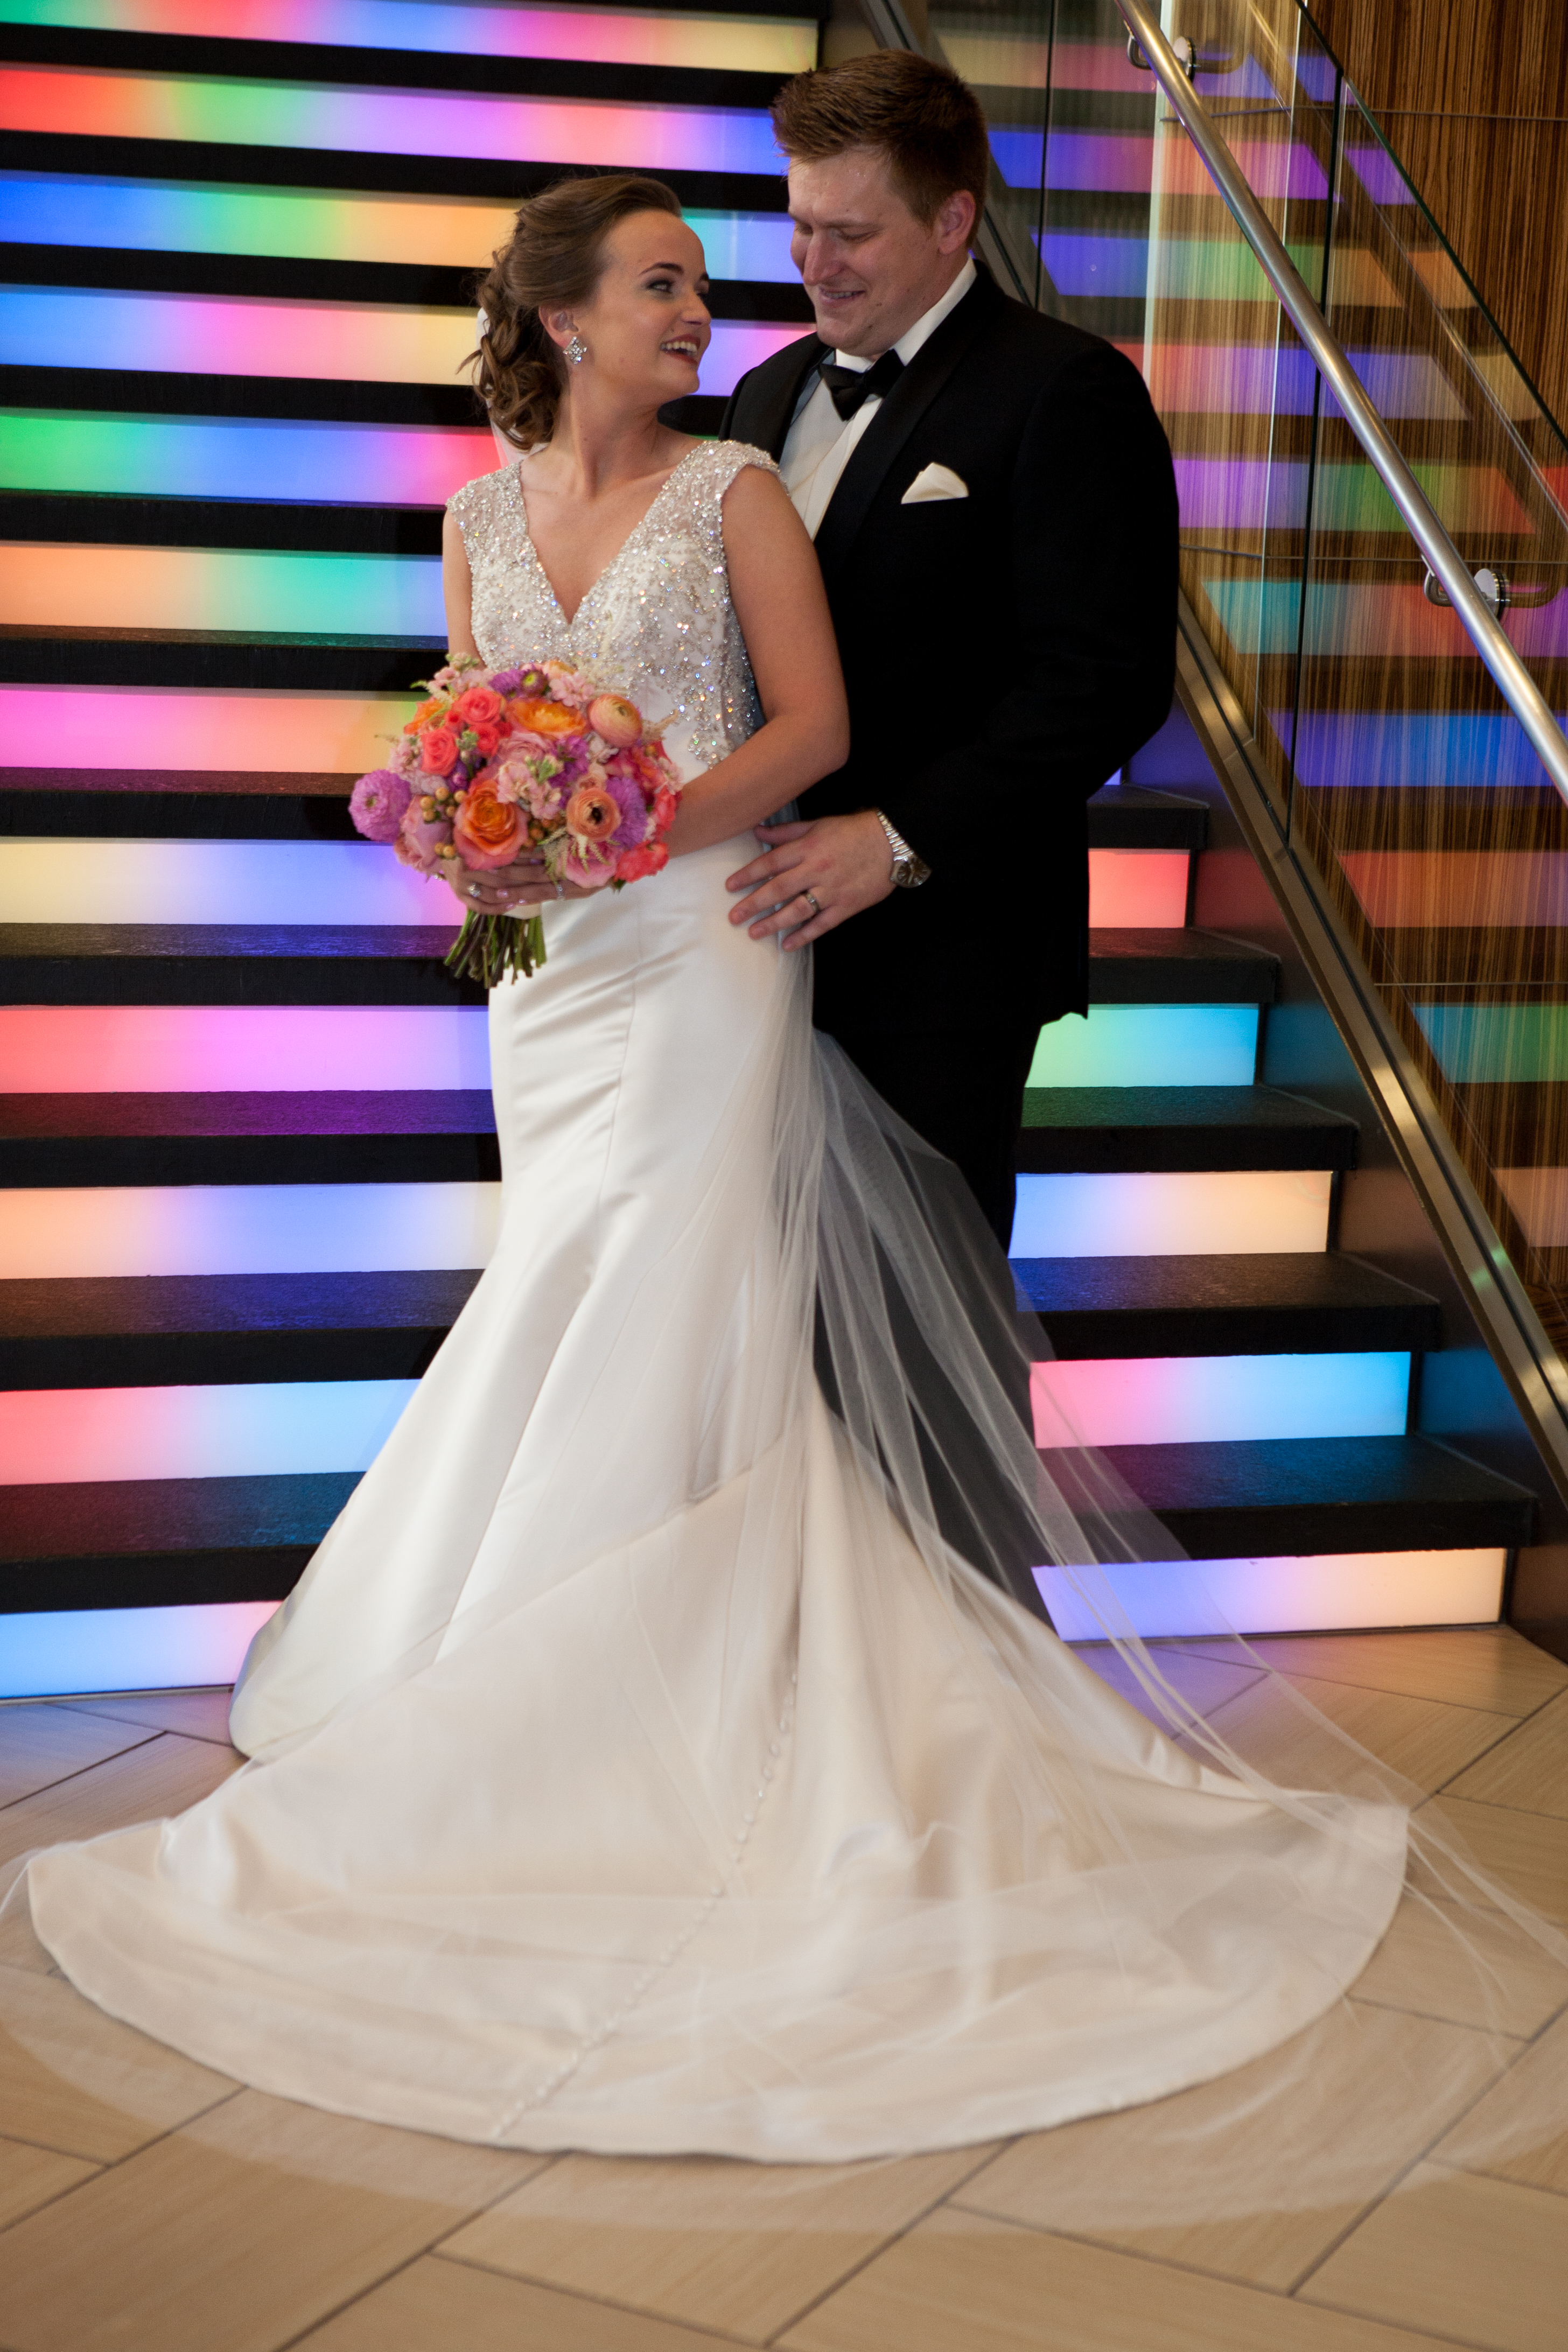 Bride and Groom in front of the rainbow stairs